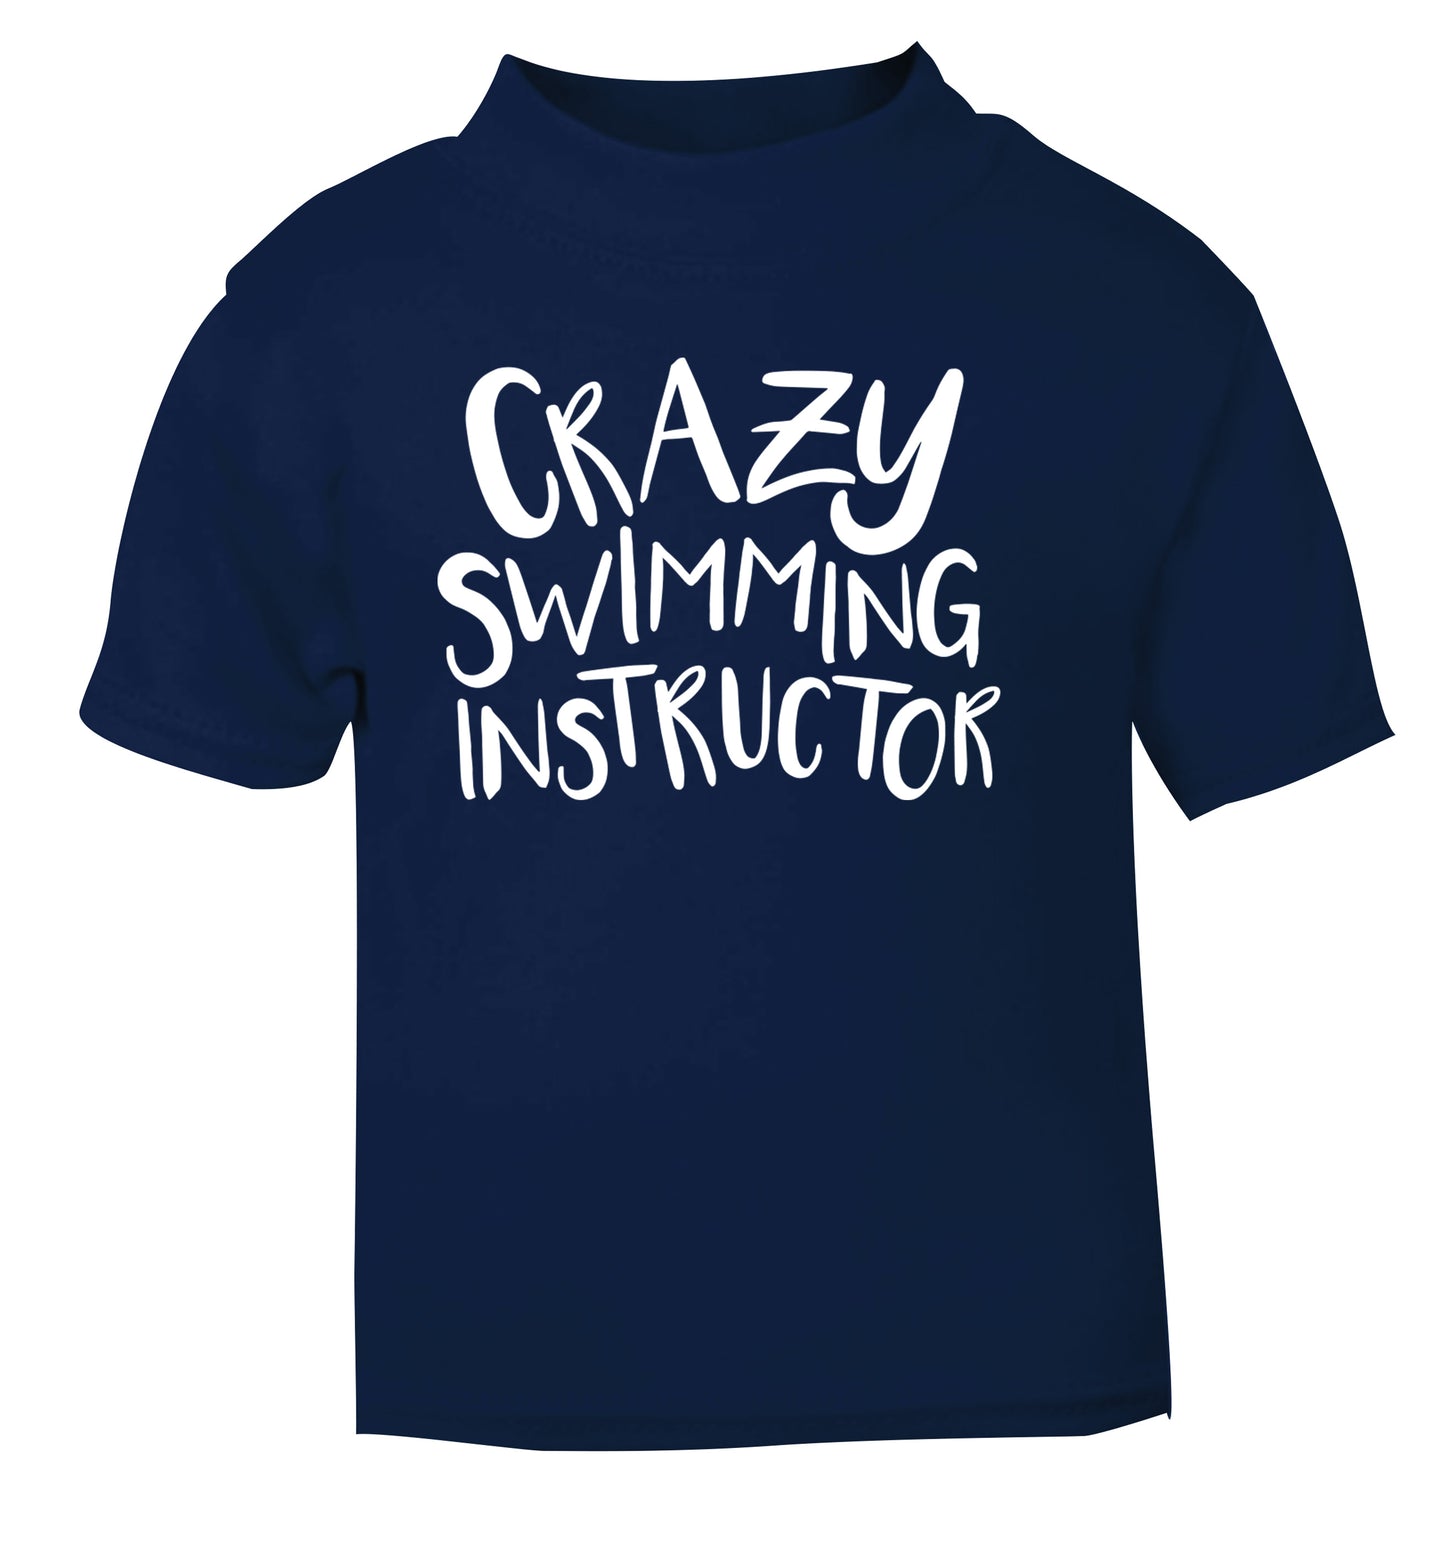 Crazy swimming instructor navy Baby Toddler Tshirt 2 Years